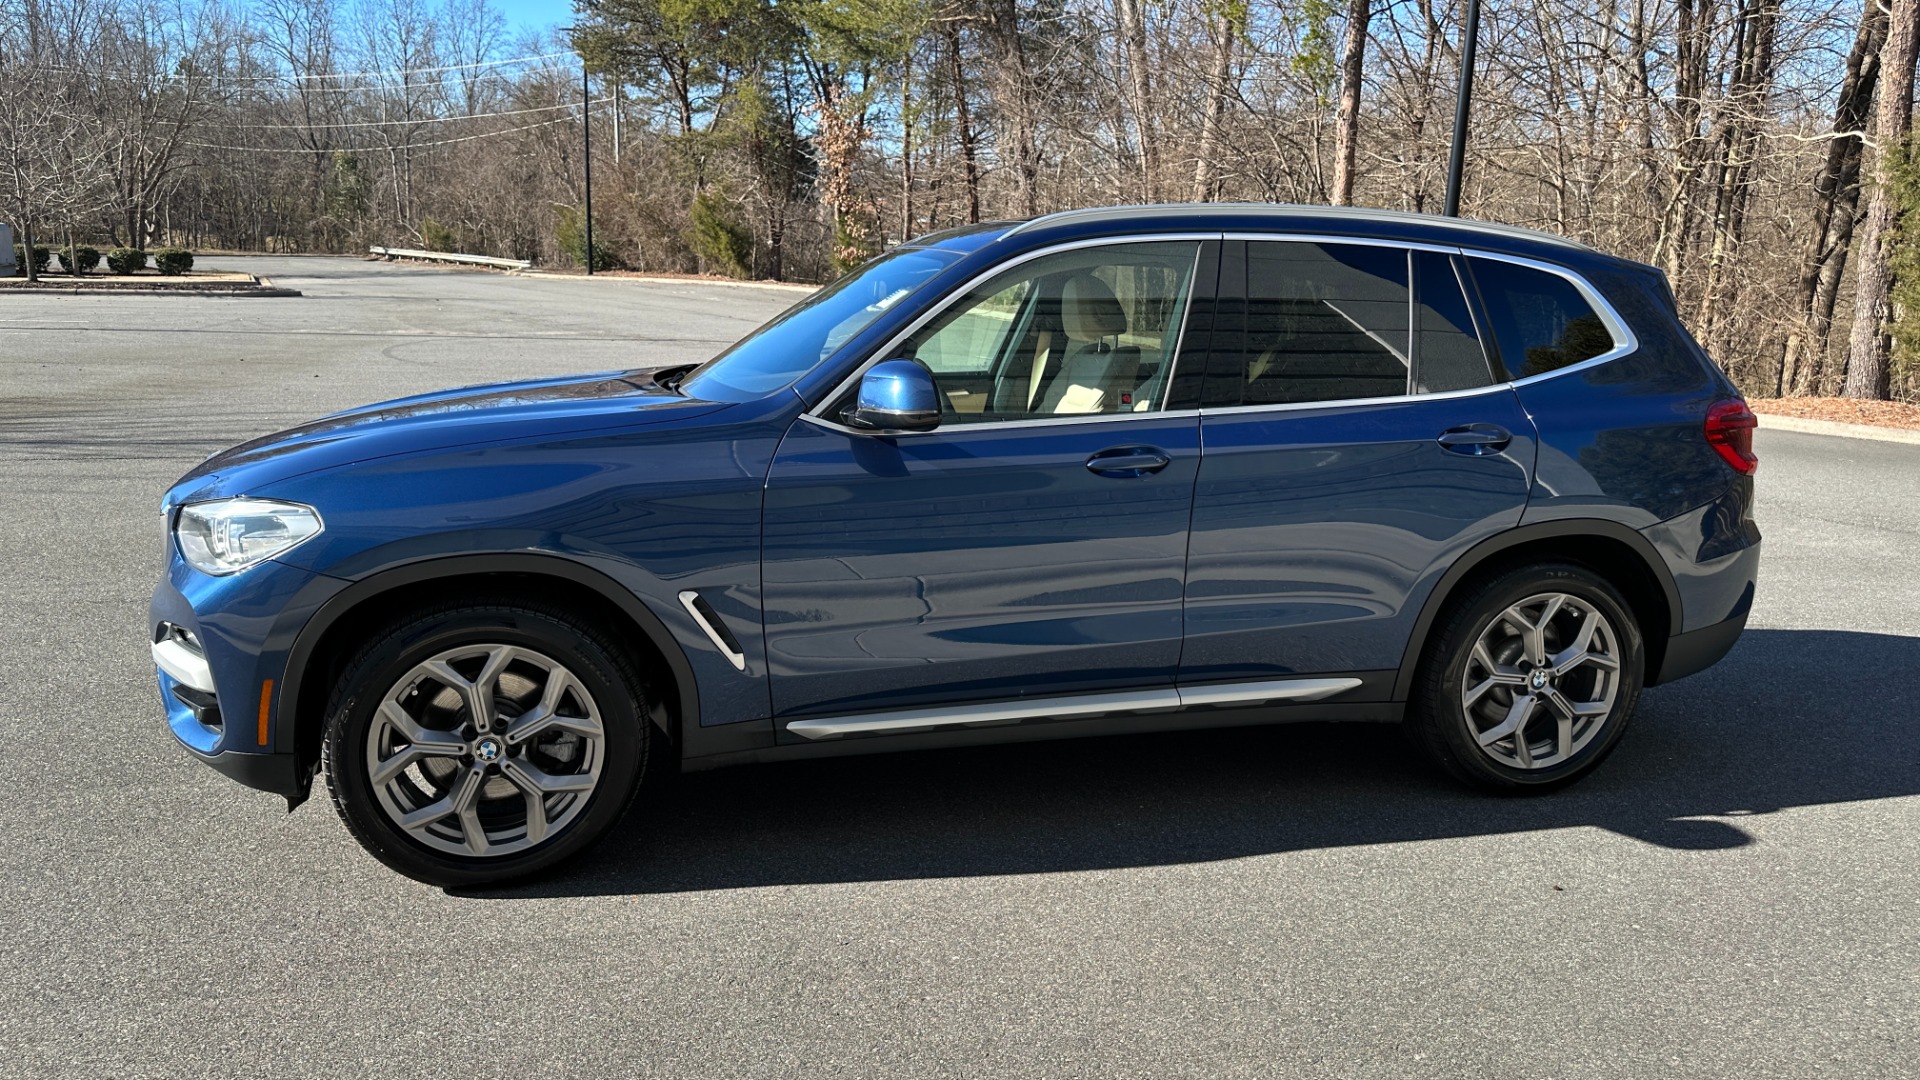 Used 2020 BMW X3 xDrive30i / DRIVER ASSISTANCE / HEATED SEATS / HEATED STEERING / NAV / COCK for sale $29,995 at Formula Imports in Charlotte NC 28227 6